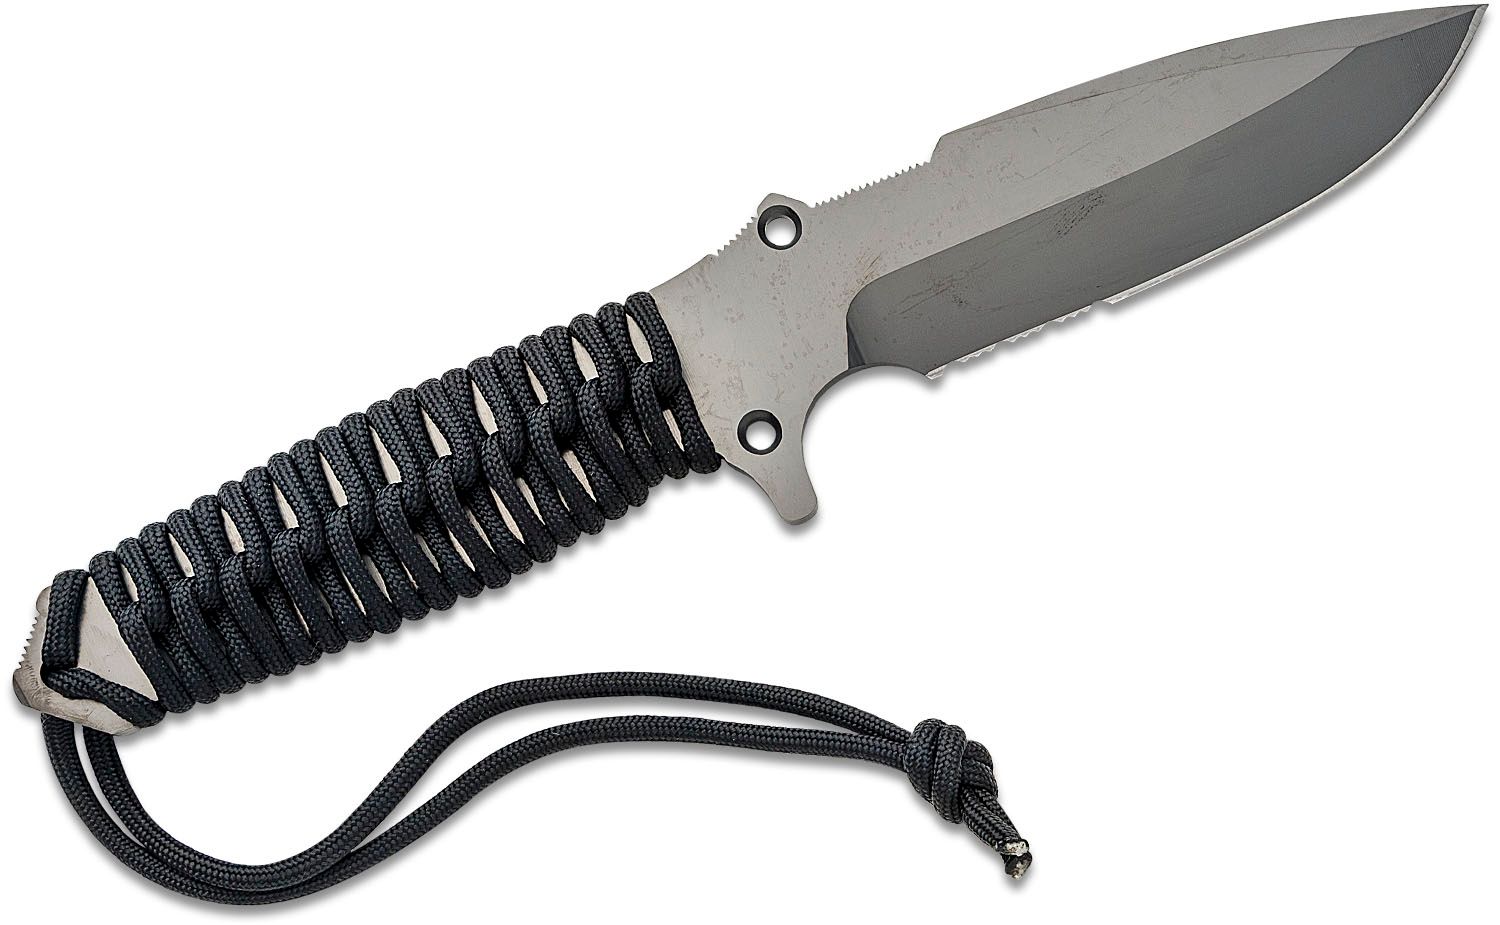 TB Outdoor Marauder Survival Knife, 4.88 MOX Gray PVD Drop Point Combo  Blade, Black Paracord Wrapped Steel Handle, Kydex Sheath - KnifeCenter -  11060001